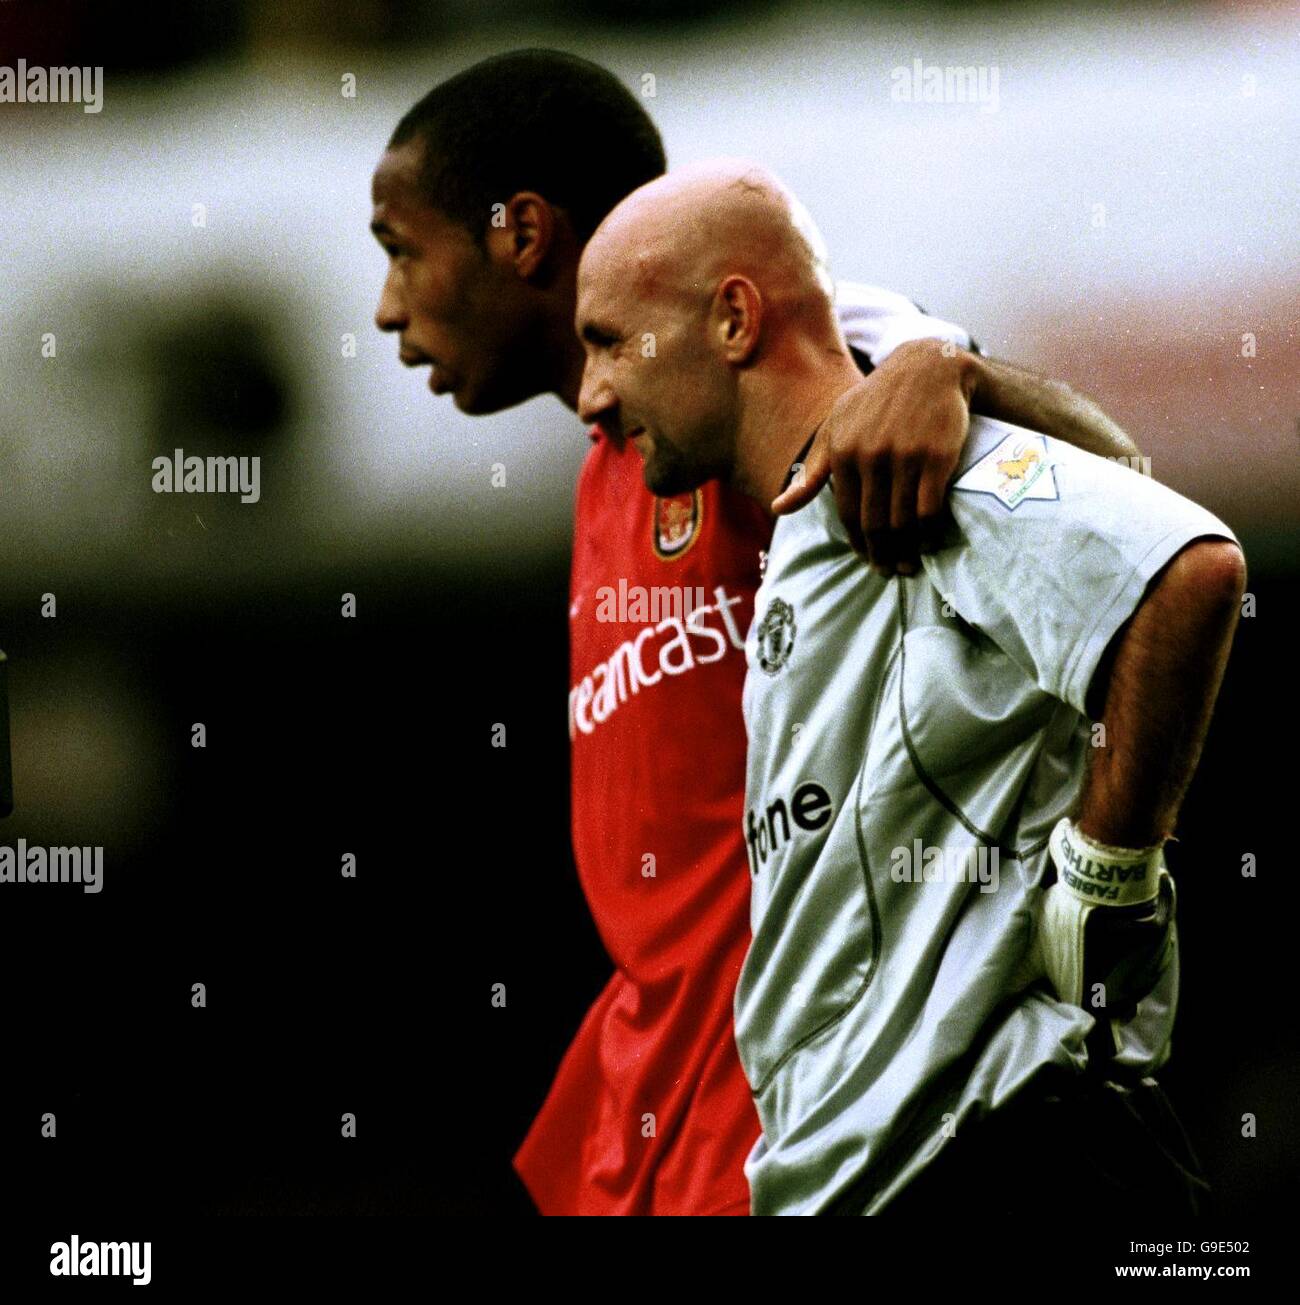 Soccer - FA Carling Premiership - Arsenal v Manchester United. Arsenal's Thierry Henry (l) walks off the field with fellow French international Fabien Barthez (r), the Manchester United goalkeeper Stock Photo